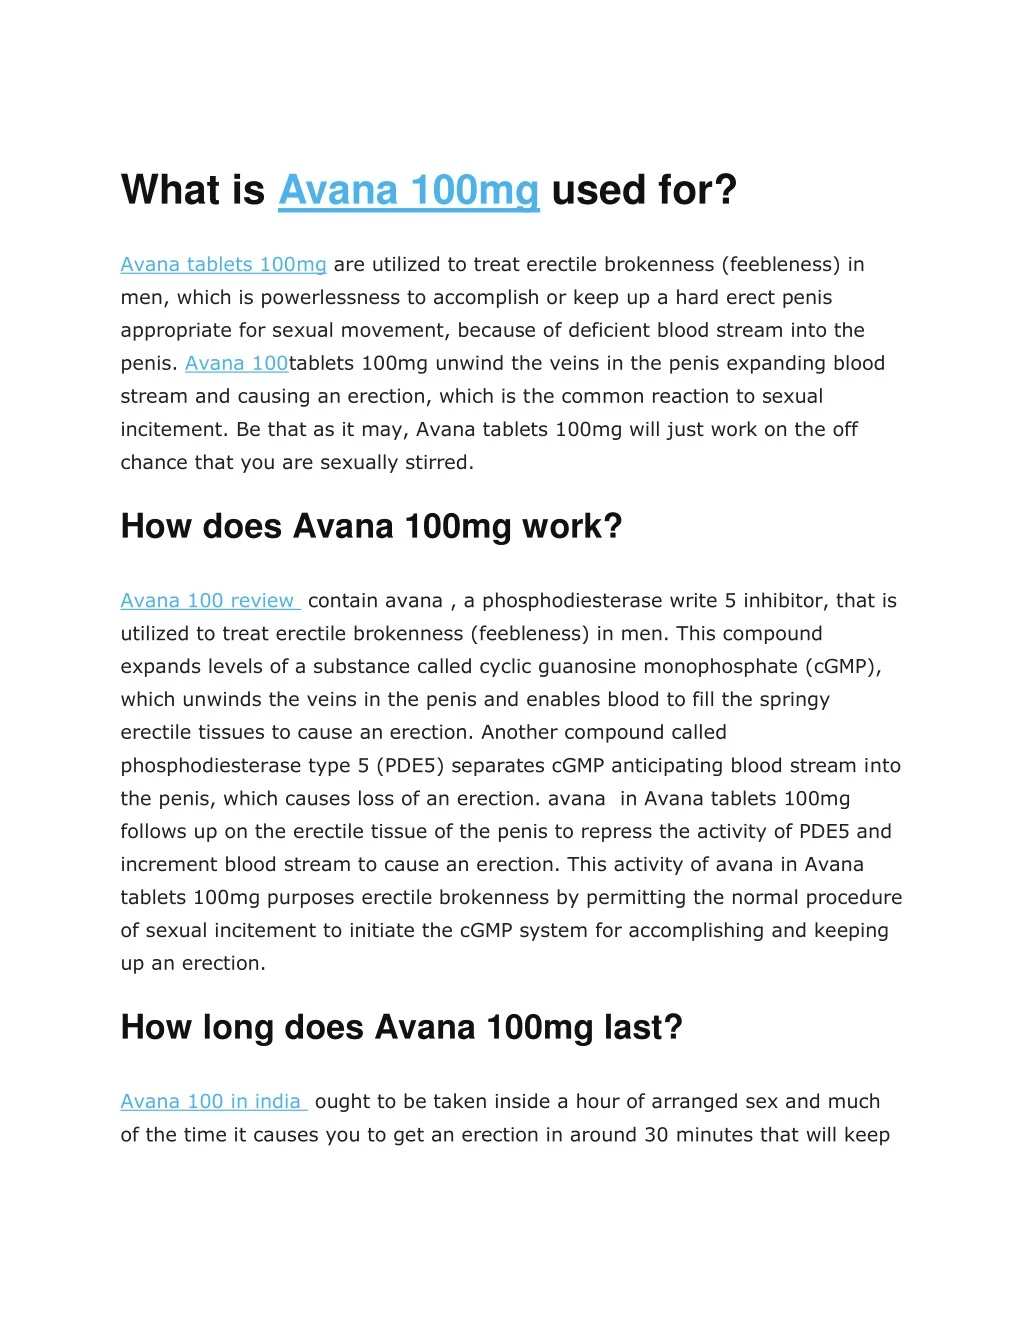 what is avana 100mg used for